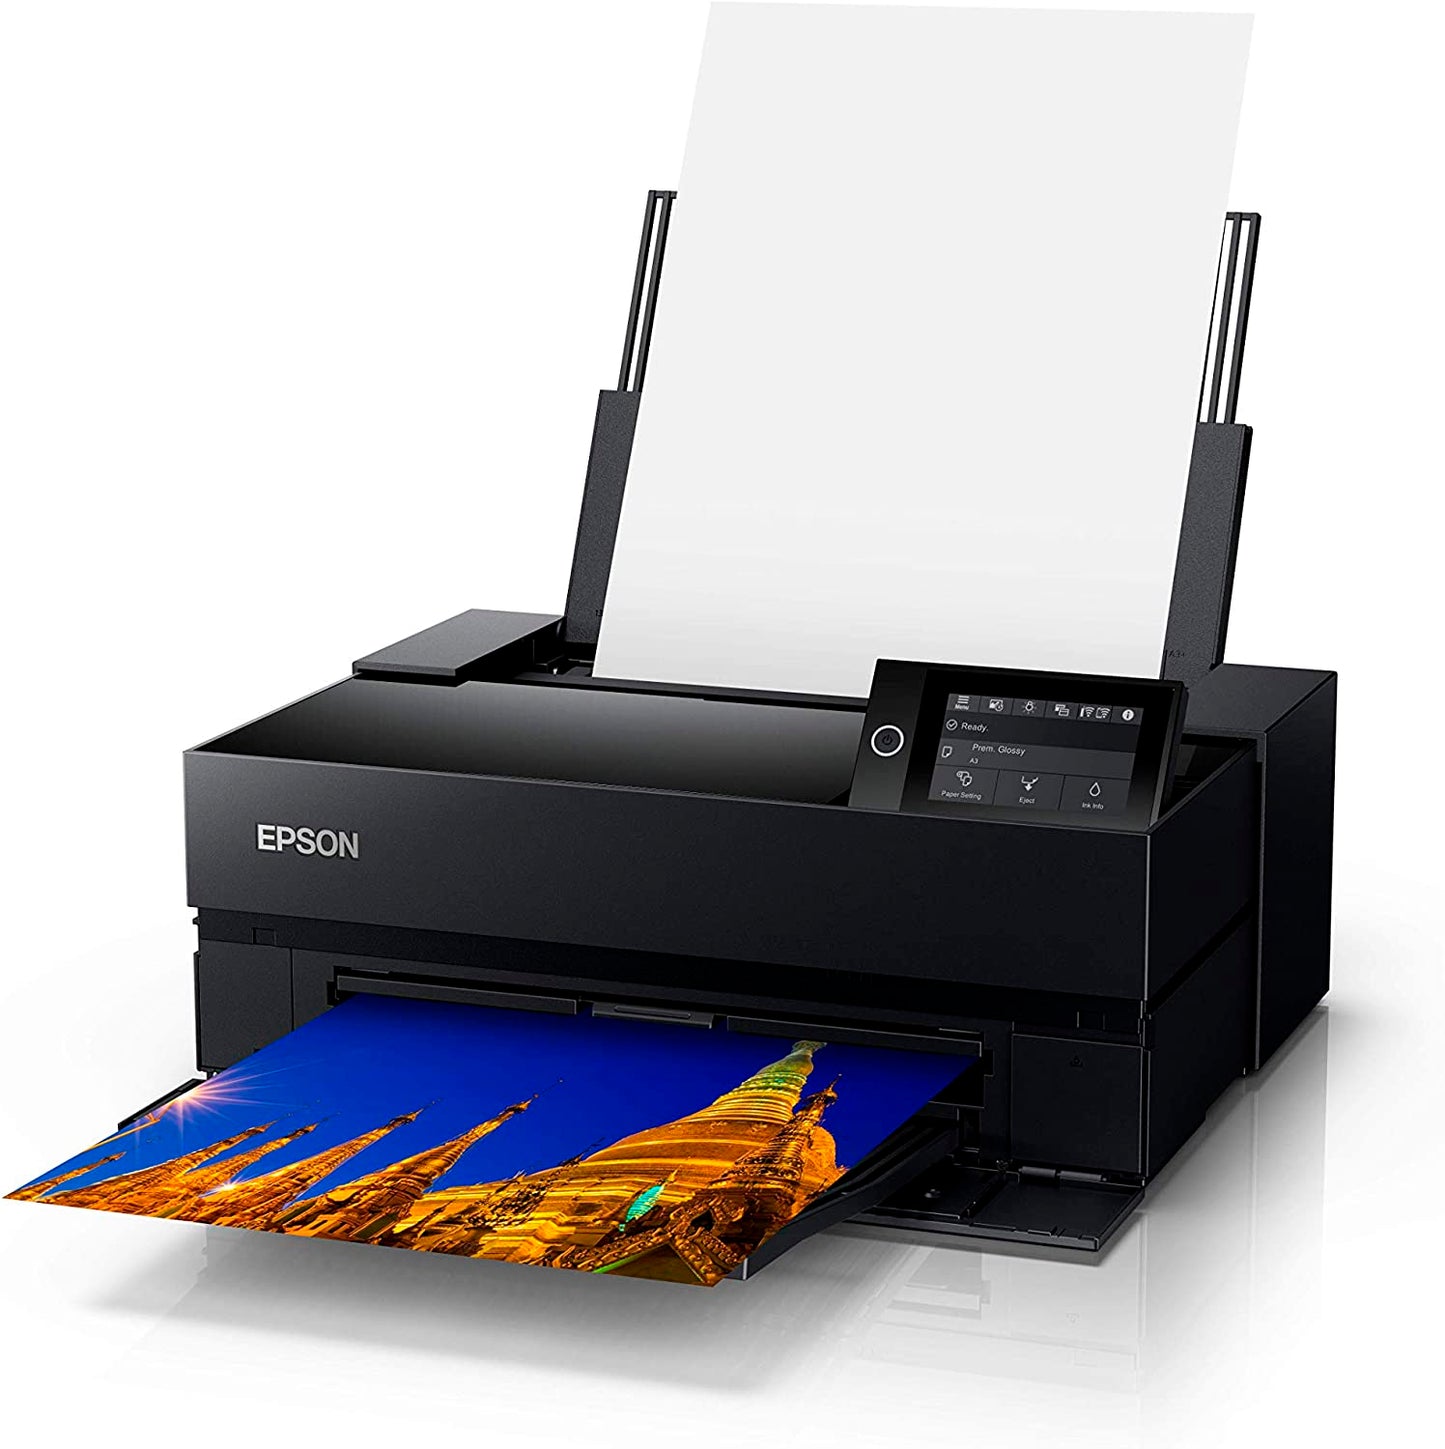 Epson surecolor p700 transparency paper printing help. : r/Epson